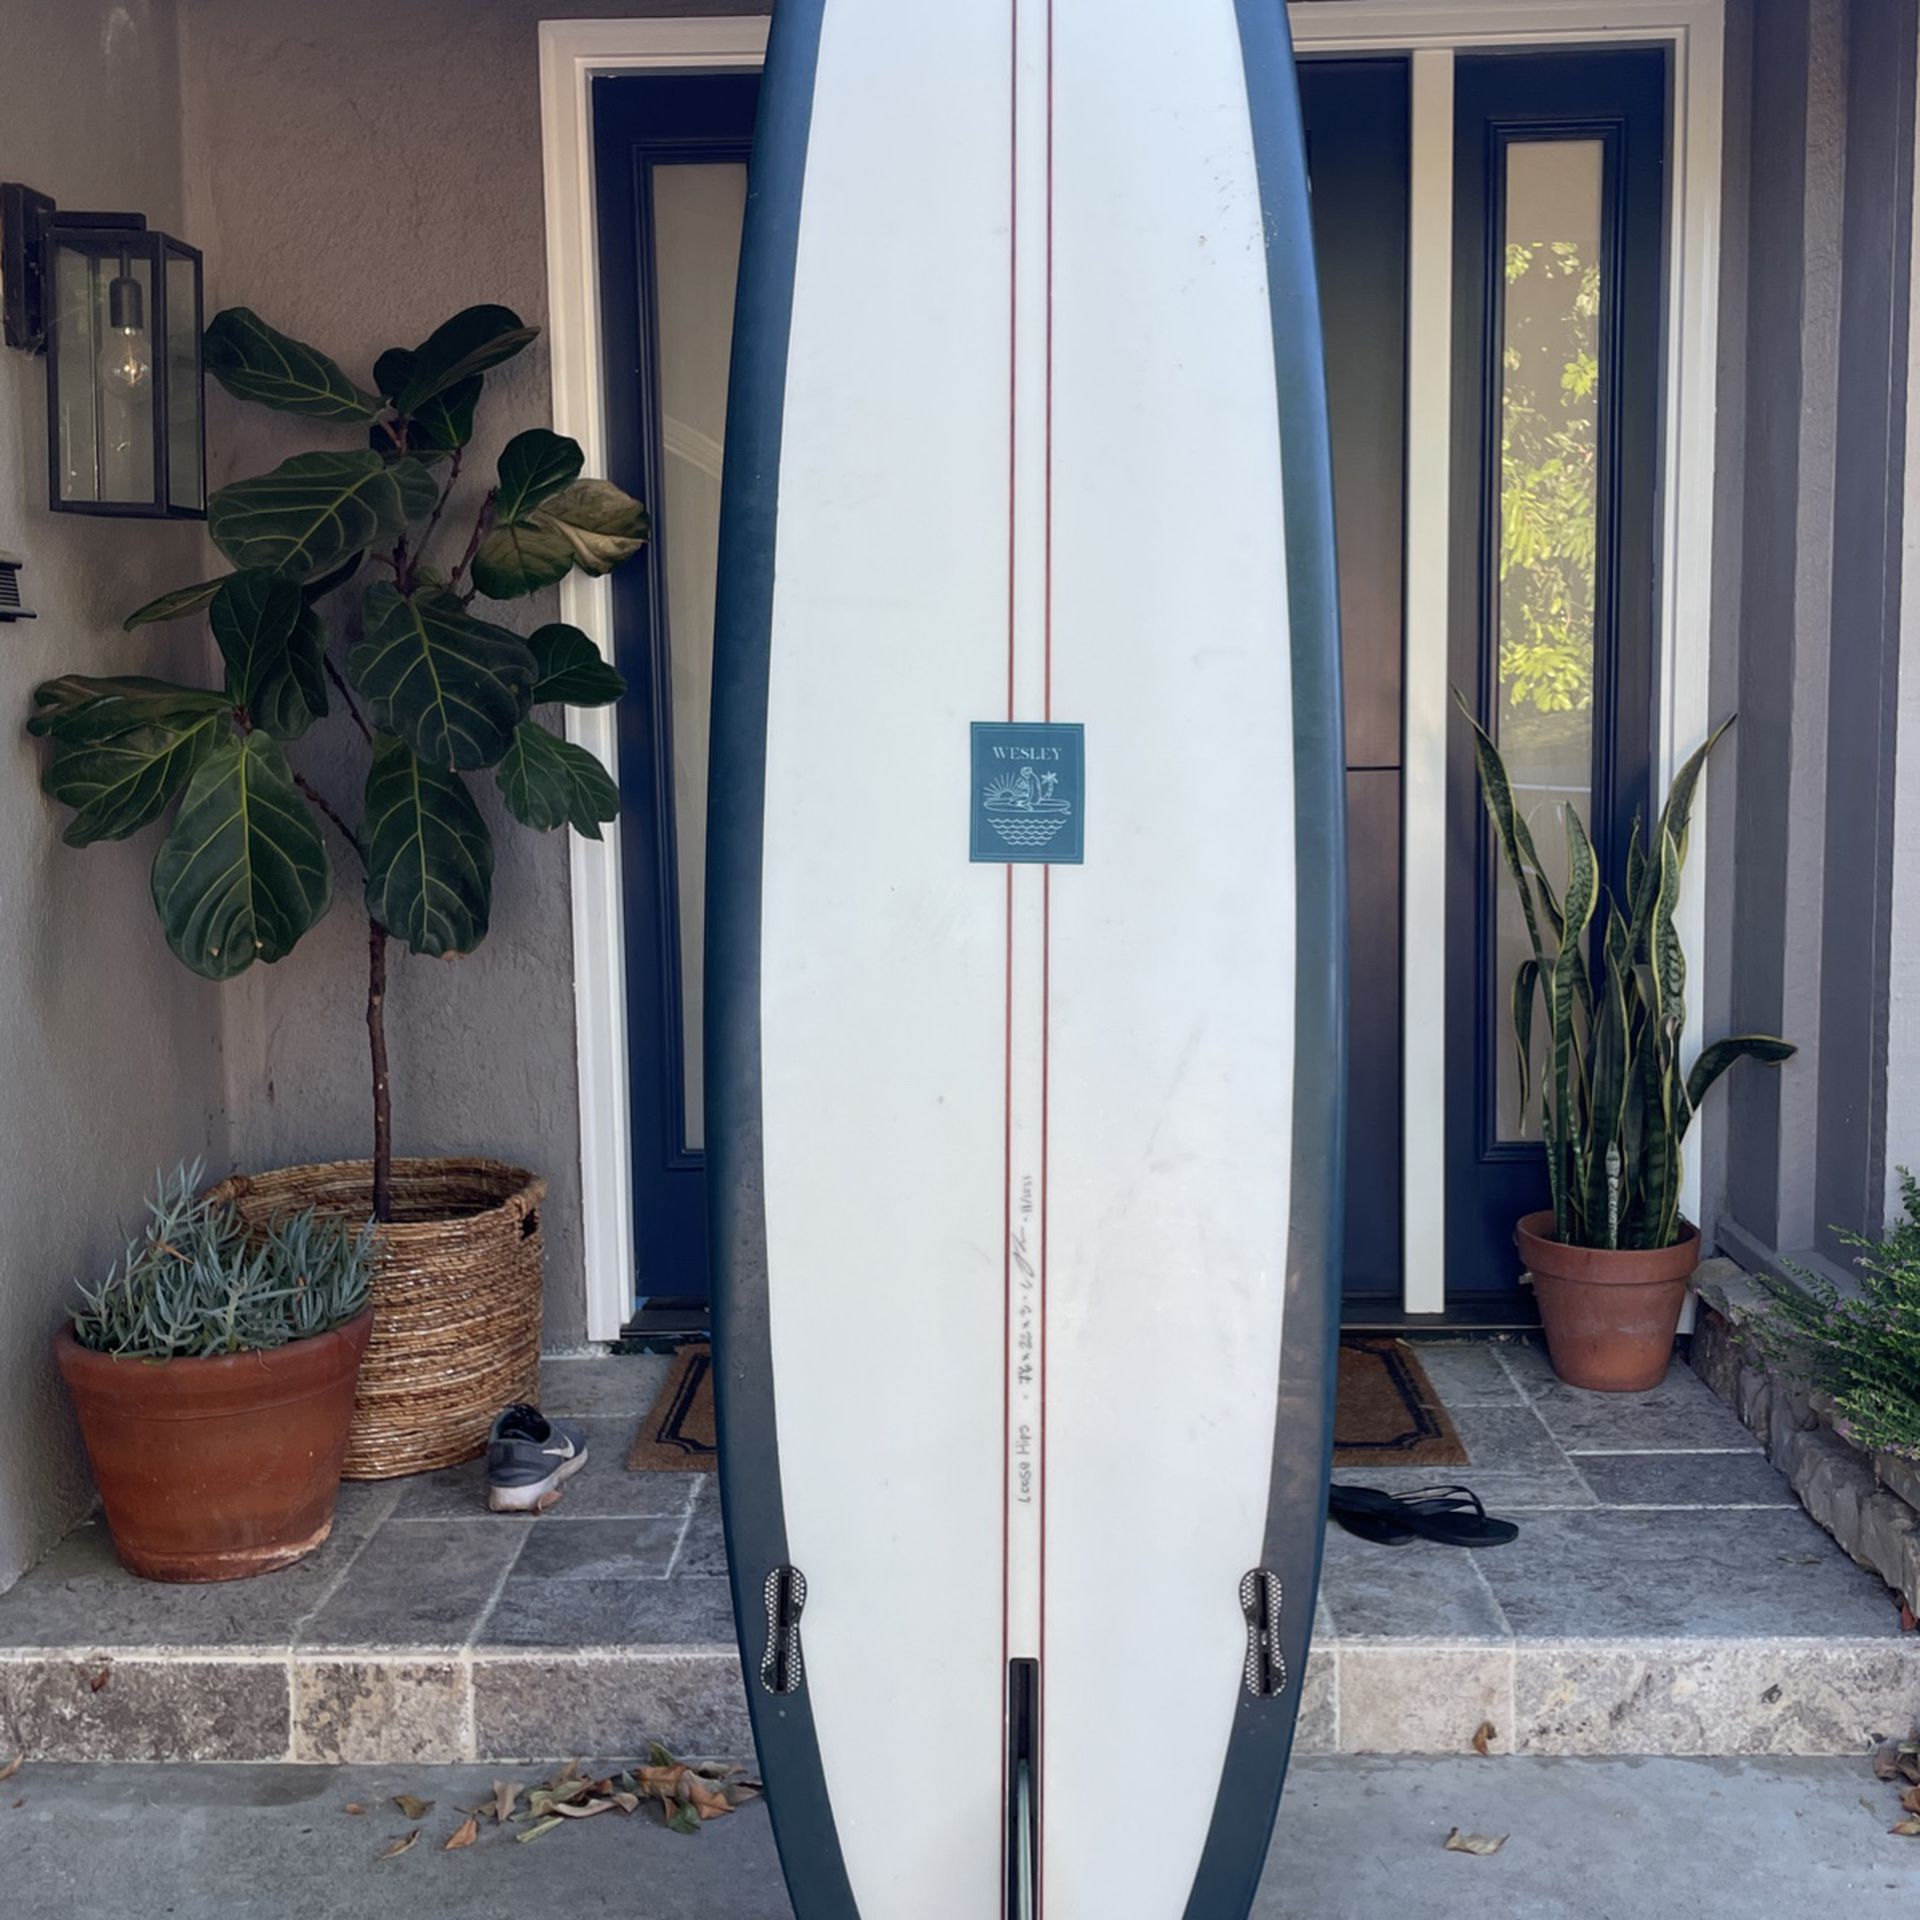 Westley Hand Shapes Loose Hips Midlength Surfboard 7’6”